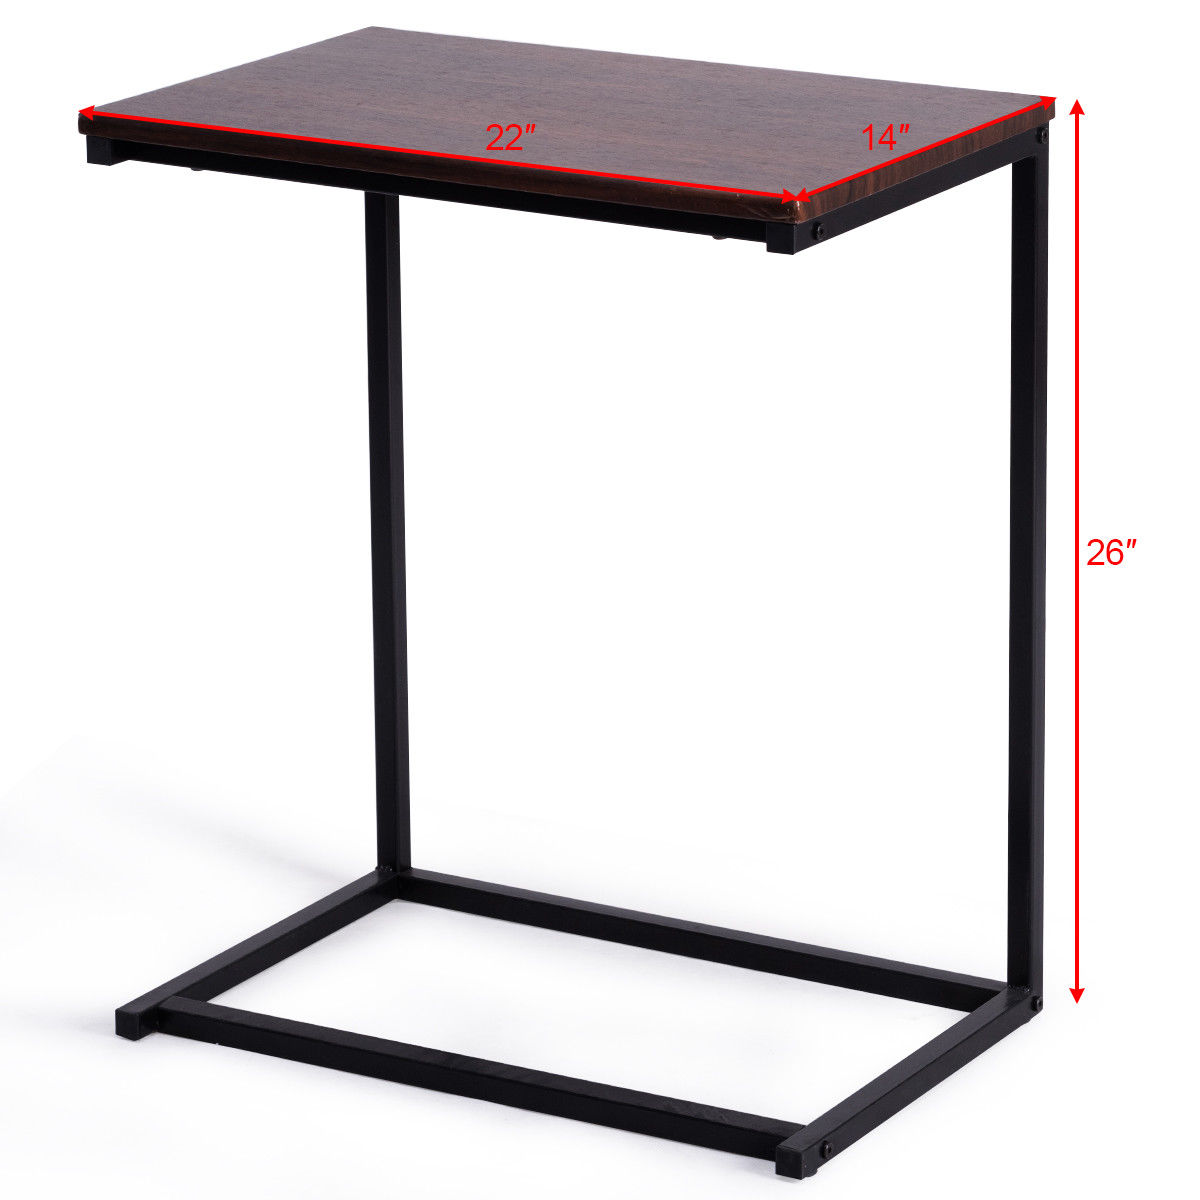 Gymax 2PCS 26'' Laptop Holder Sofa Side End Table C Table Home Office Furniture - image 5 of 9